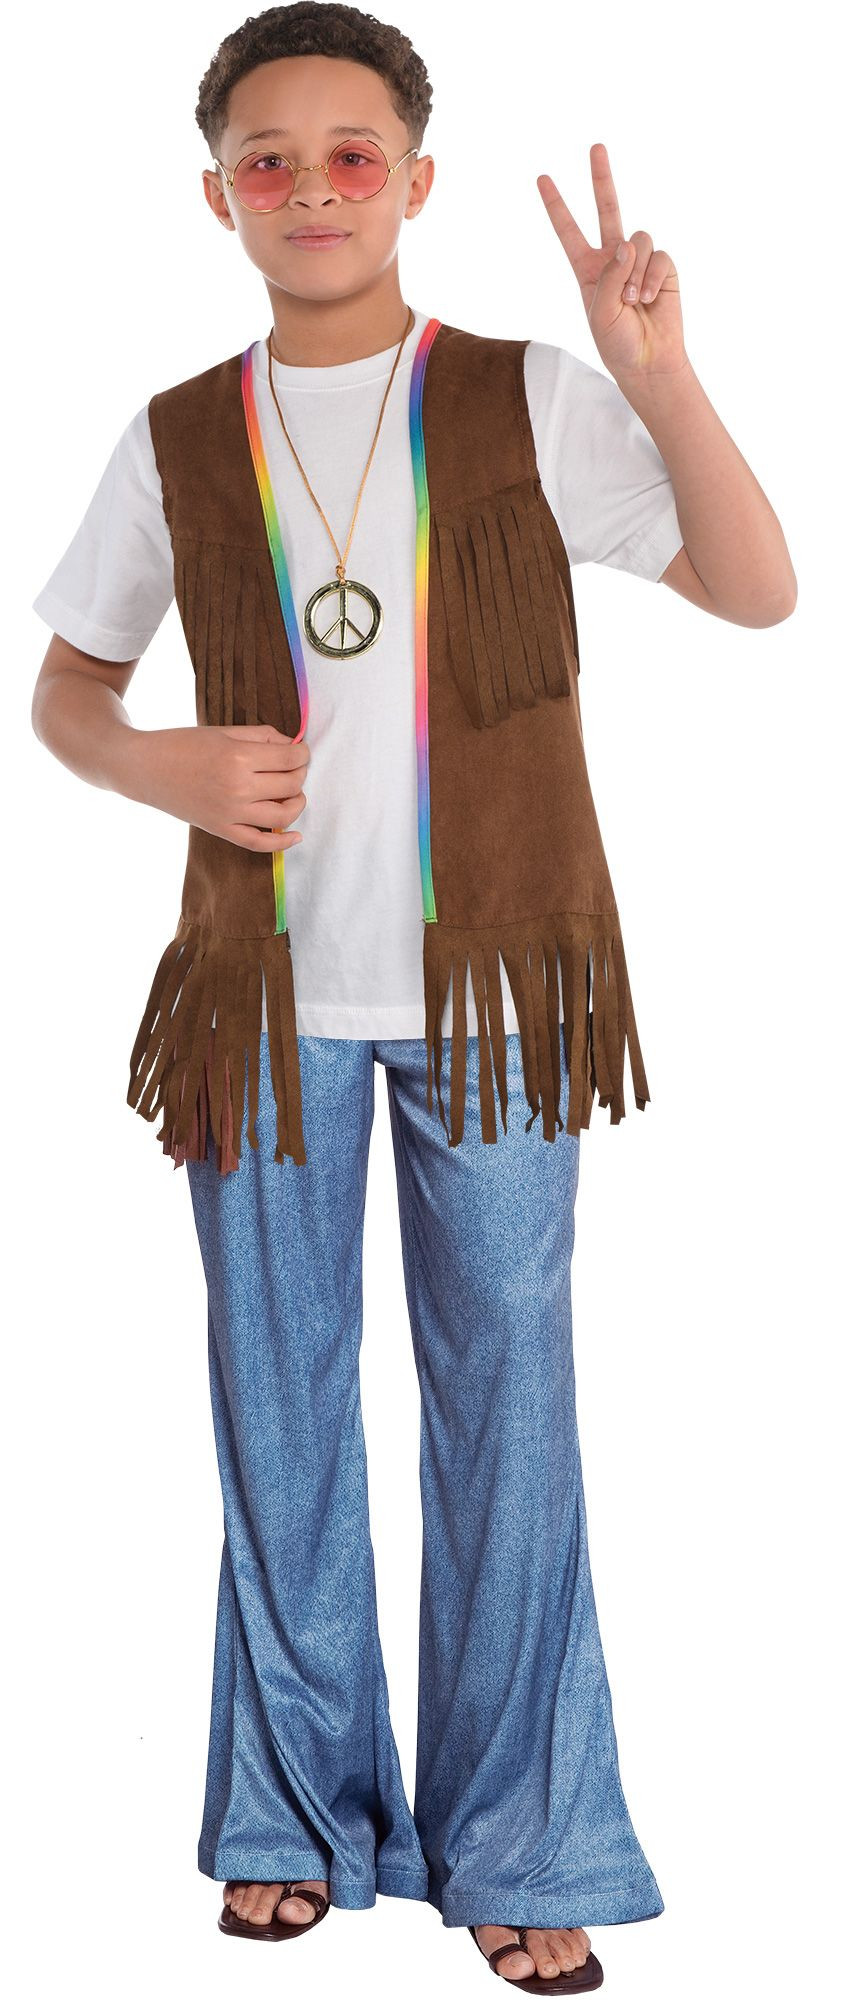 Hippie DIY Costume
 Create Your Own Boys Hippie Costume Accessories Party City